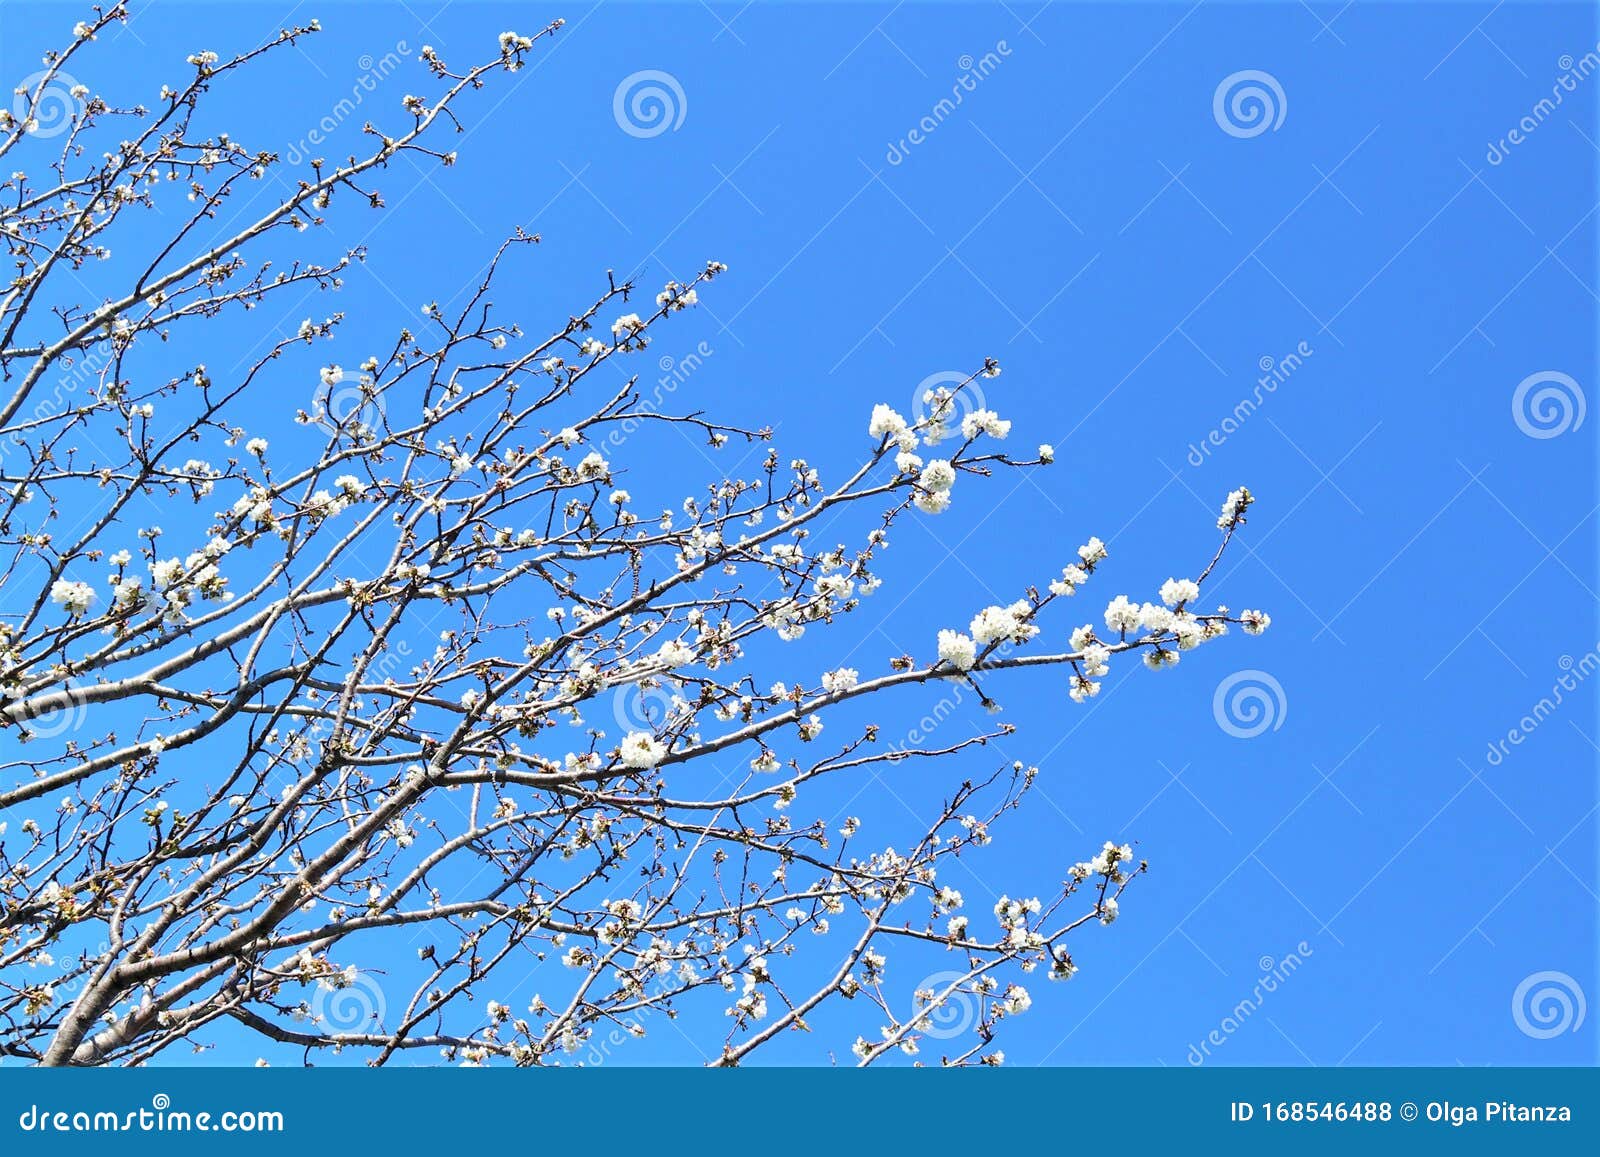 sakura blooming on a blue background spring, flowering and nature concept. beautiful white apricot/cherry flowers